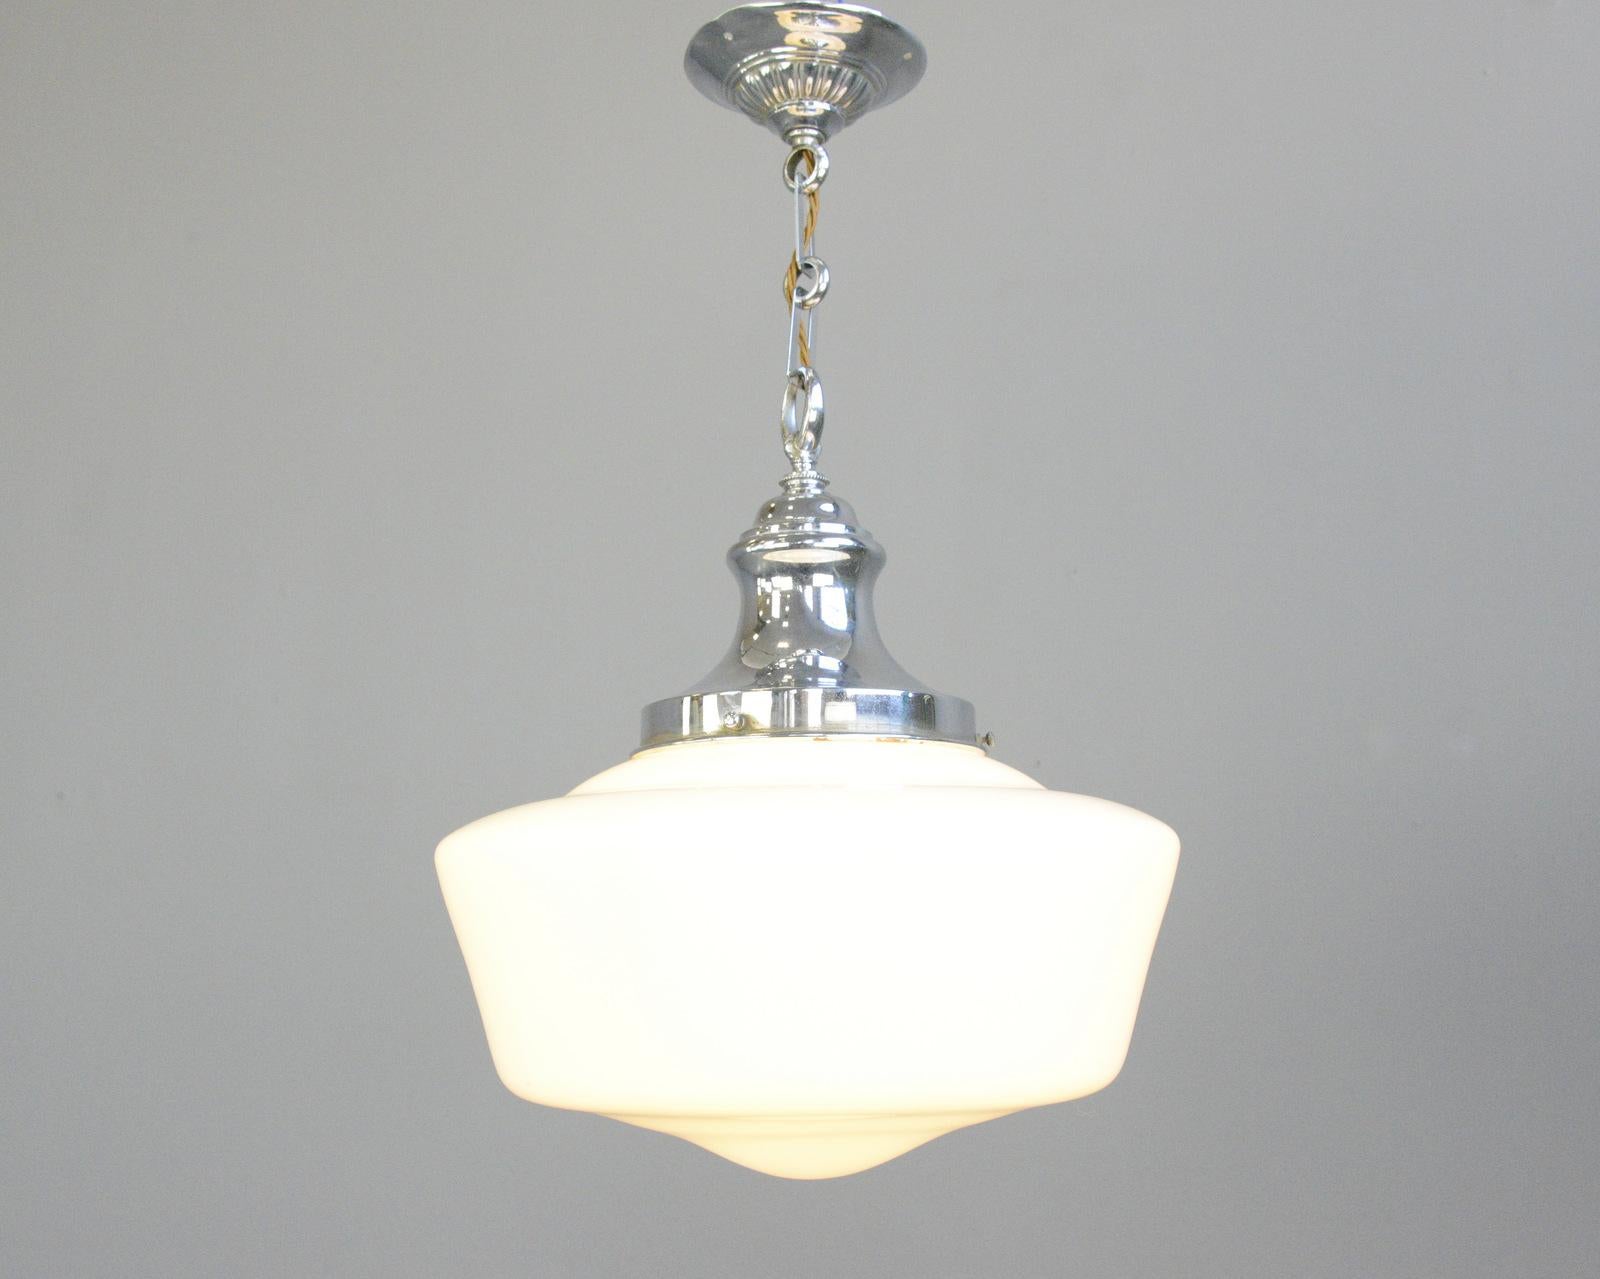 English Art Deco opaline pendant light, circa 1920s.

- Ornate nickel gallery and ceiling rose
- Takes E27 fitting bulbs
- Opaline glass
- English ~ 1920s
- 36cm wide x 38cm tall

Condition Report

Fully re wired with modern electrical